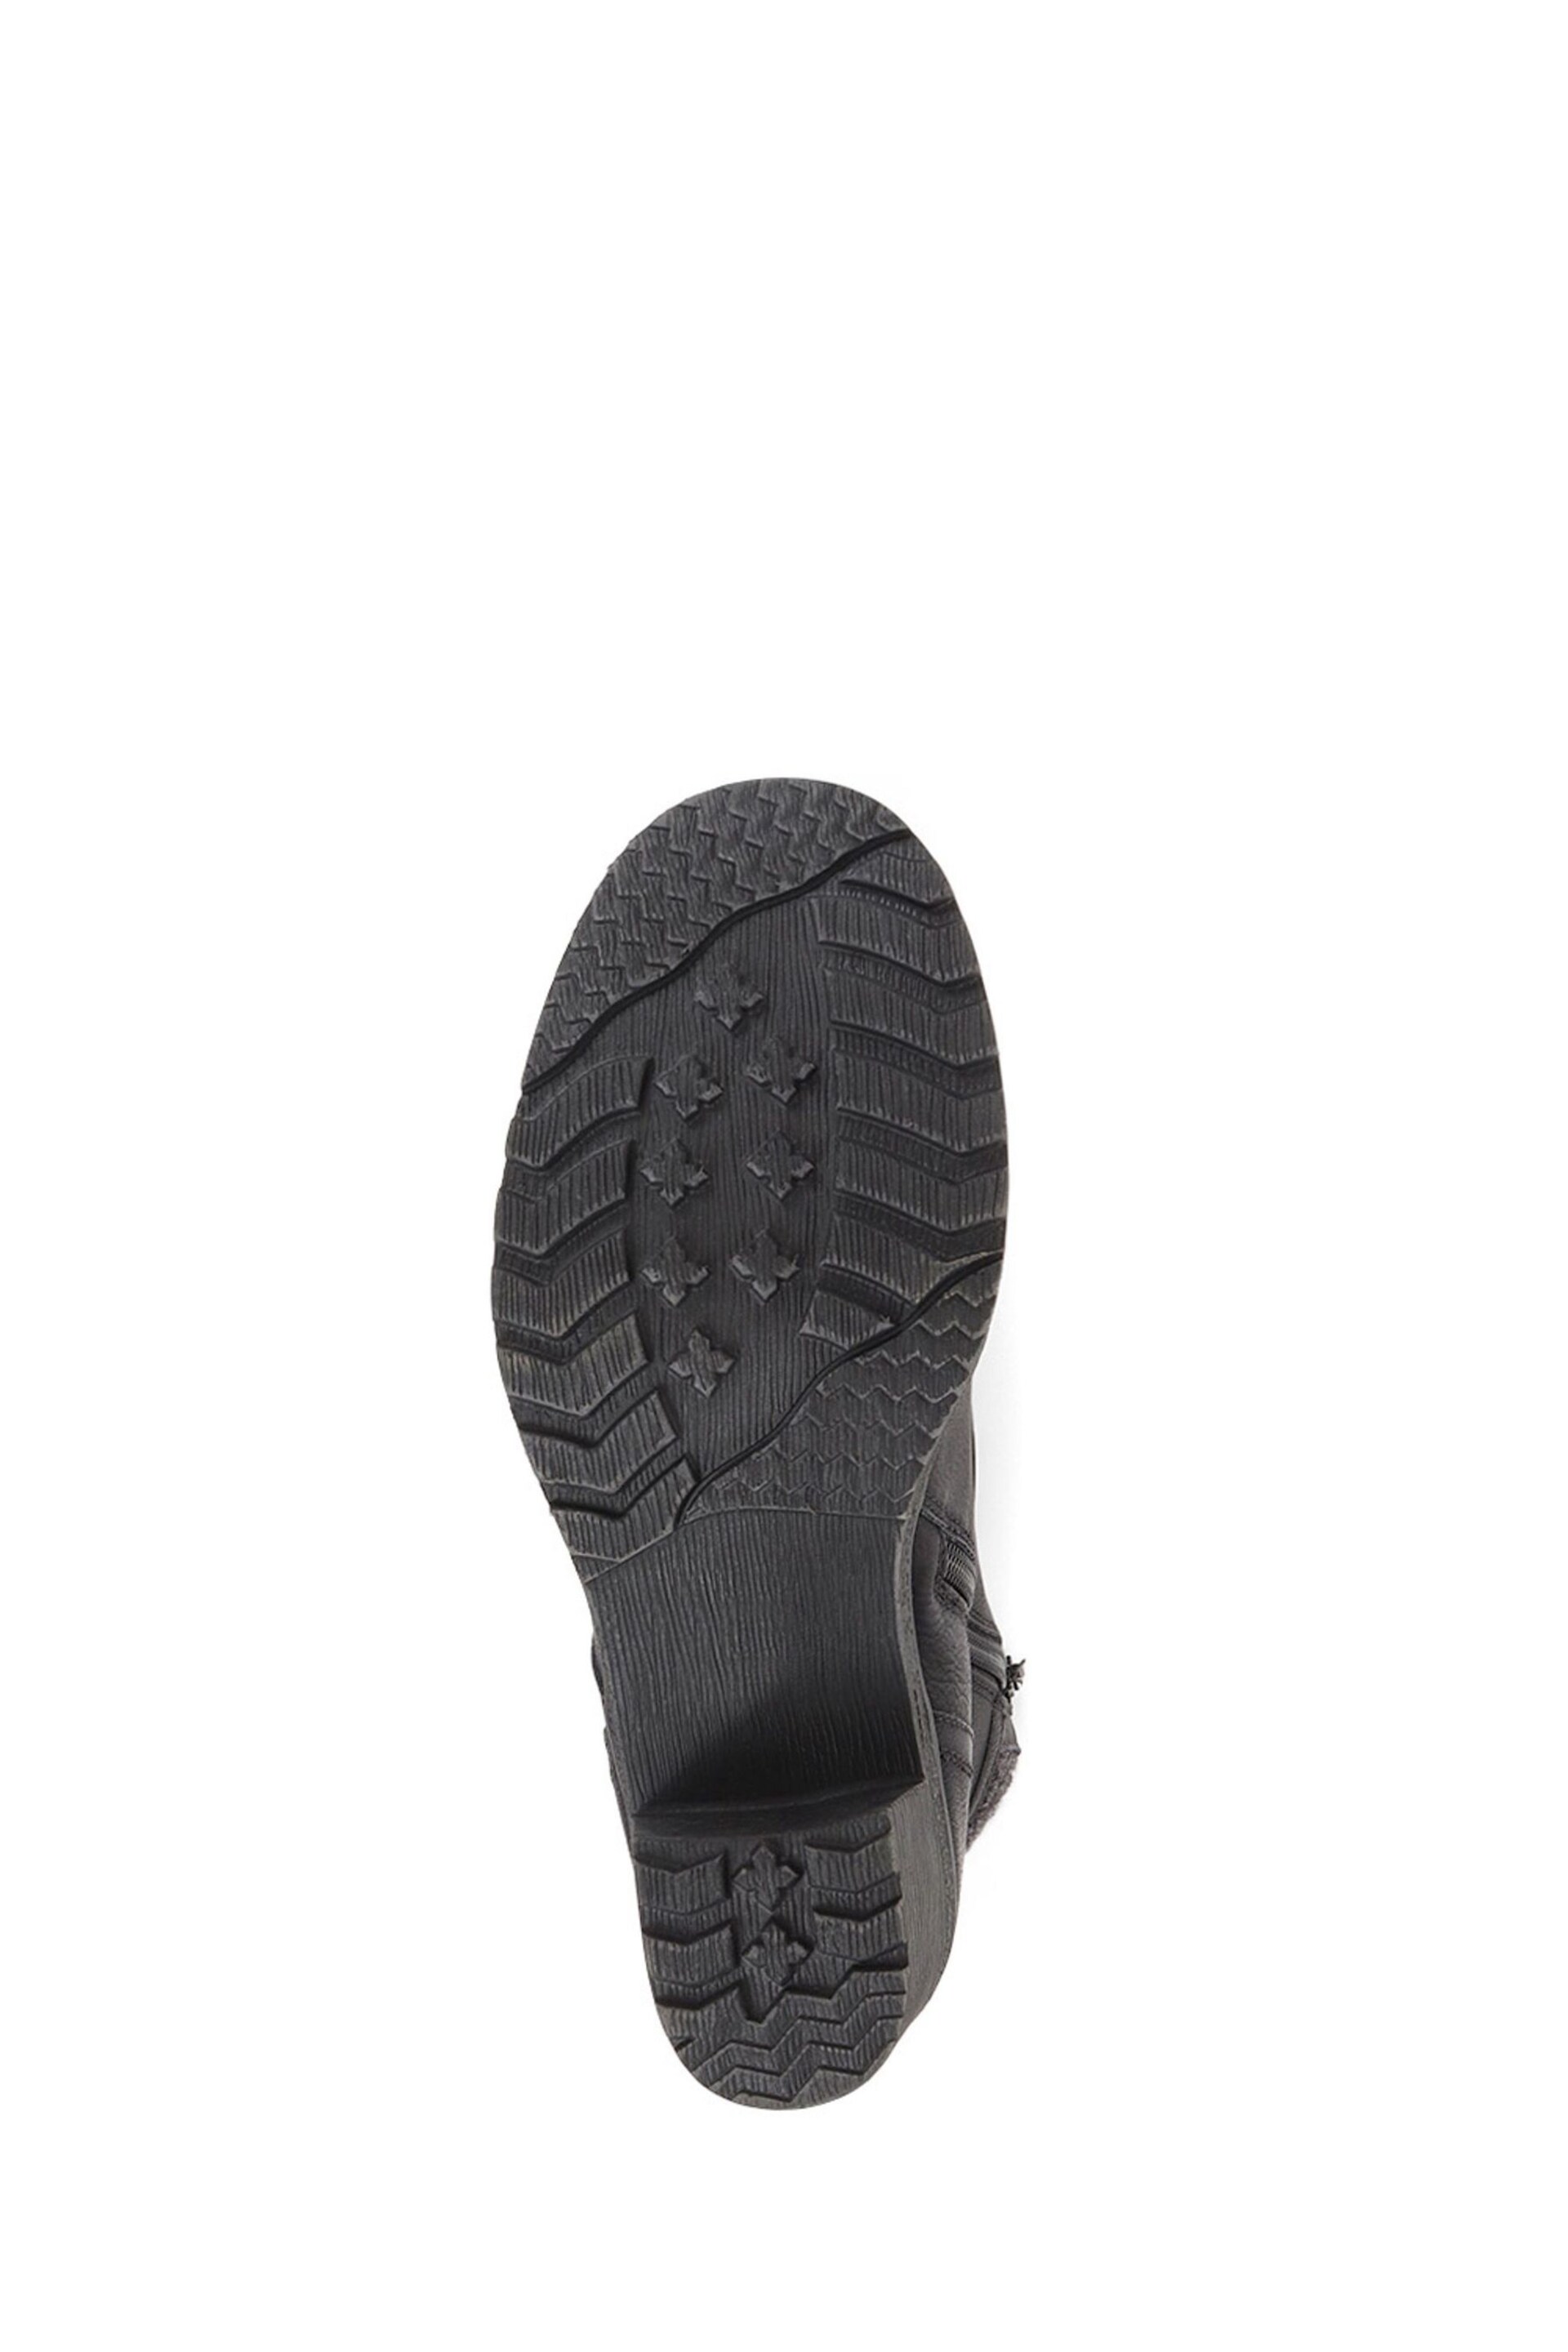 Pavers Lace-Up Ankle Black Boots - Image 5 of 5